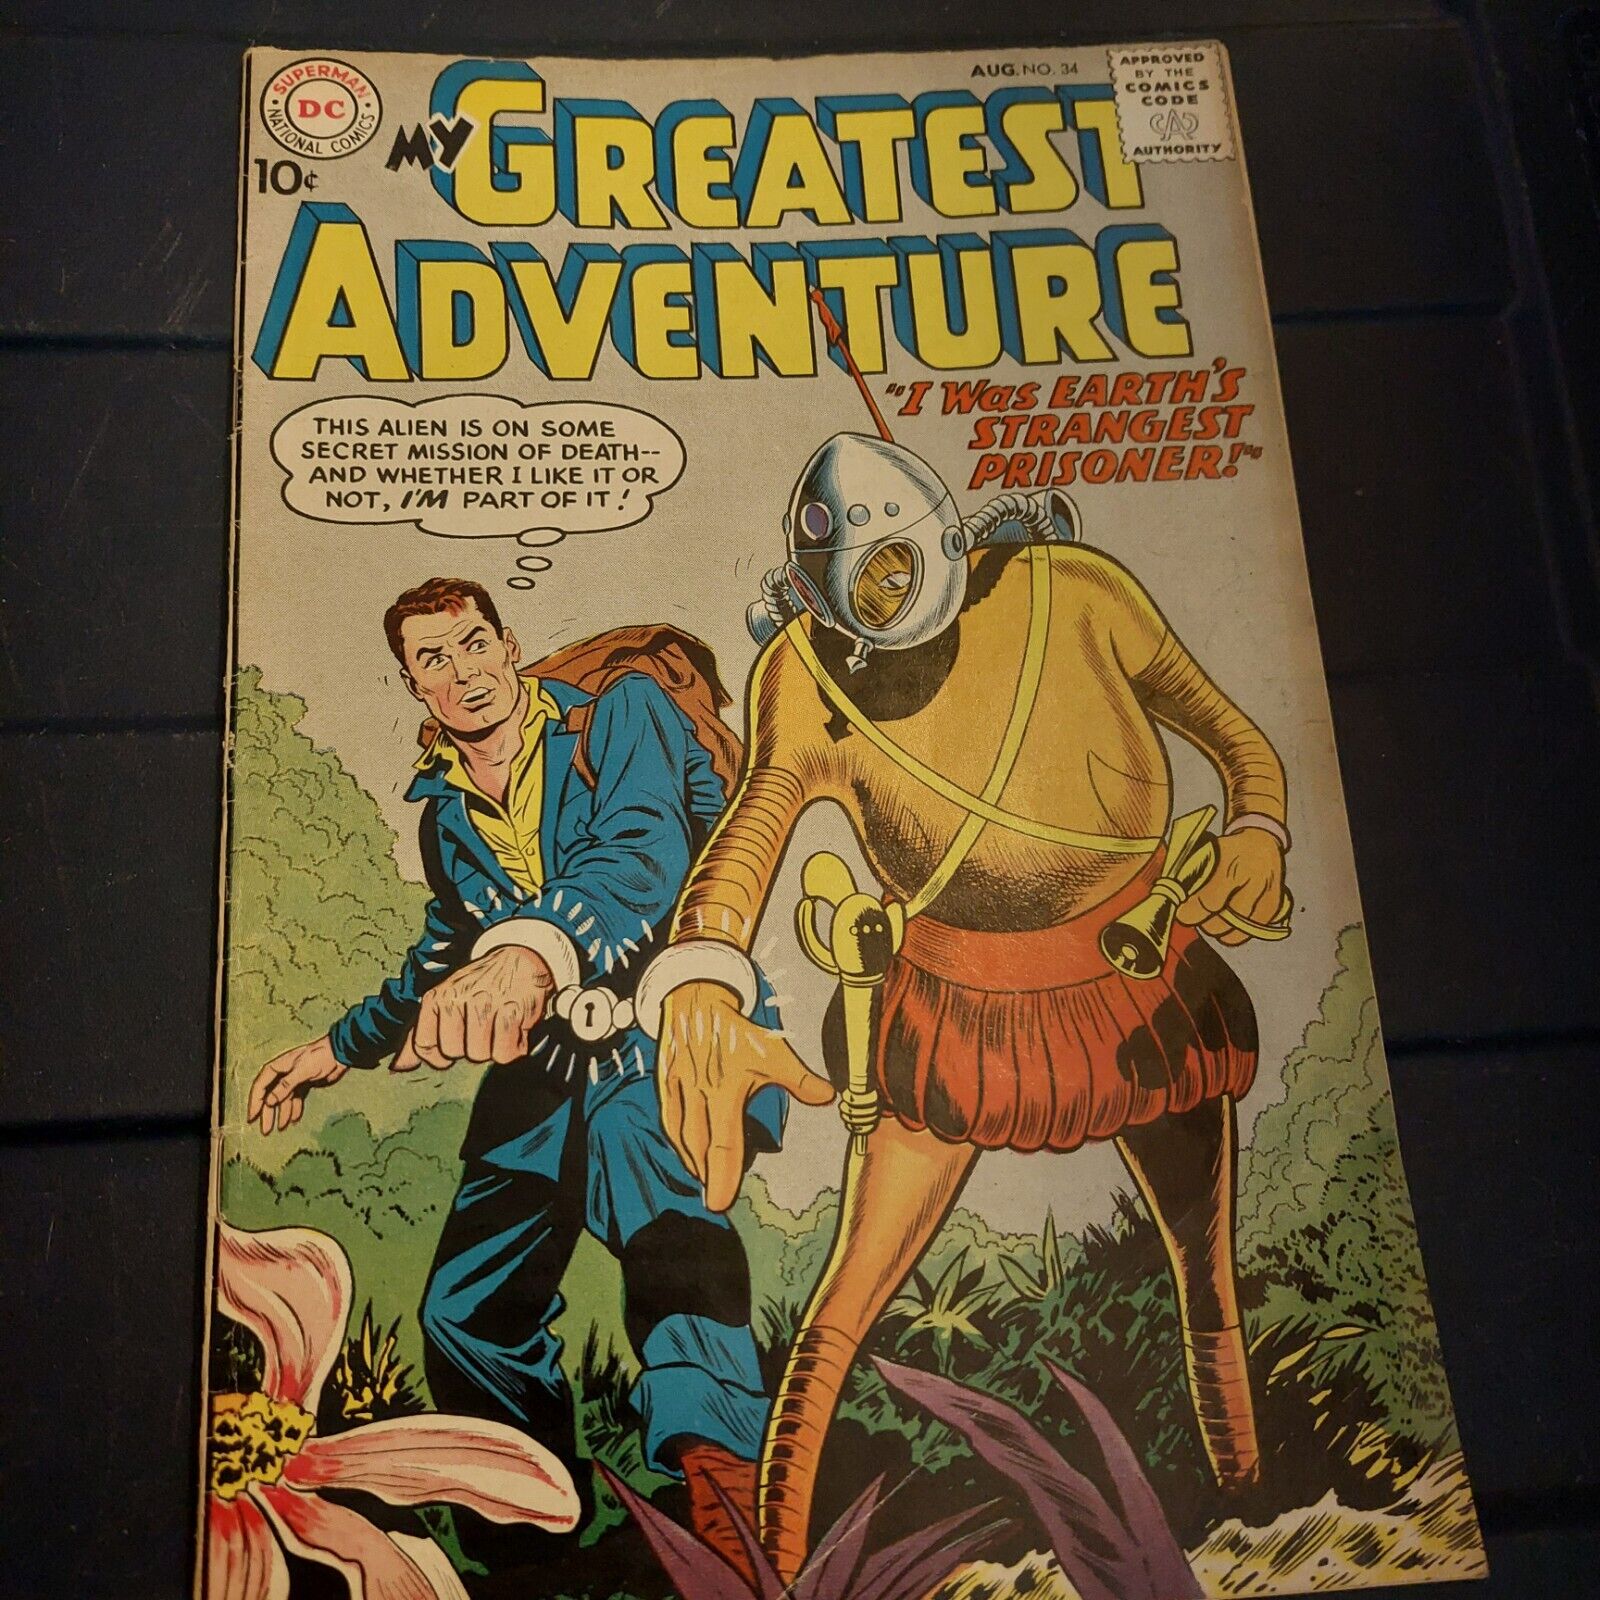 My Greatest Adventure #34 SILVER AGE SCI-FI DC COMICS 1959 EXCELLENT WHITE PAGES